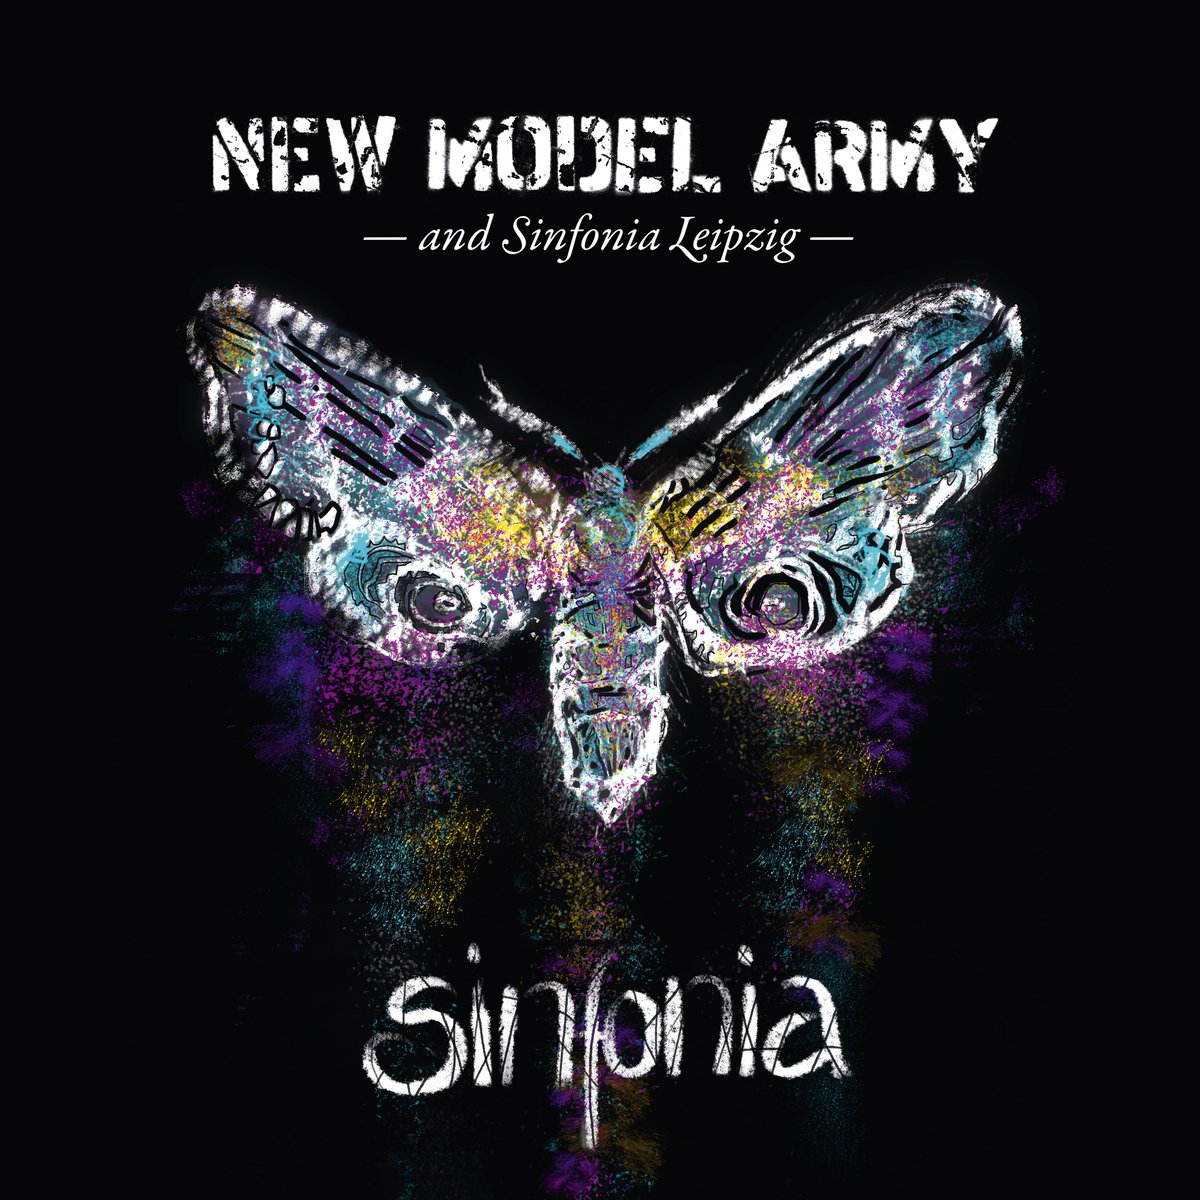 The new album from @officialnma 'Sinfonia' is out today and it is a masterpiece. A unique collaboration with Sinfonia Leipzig awaits you.

More details here: ear-music.net/newmodelarmy_s…

#NewModelArmy #NMA #Sinfonia #SinfoniaLeipzig